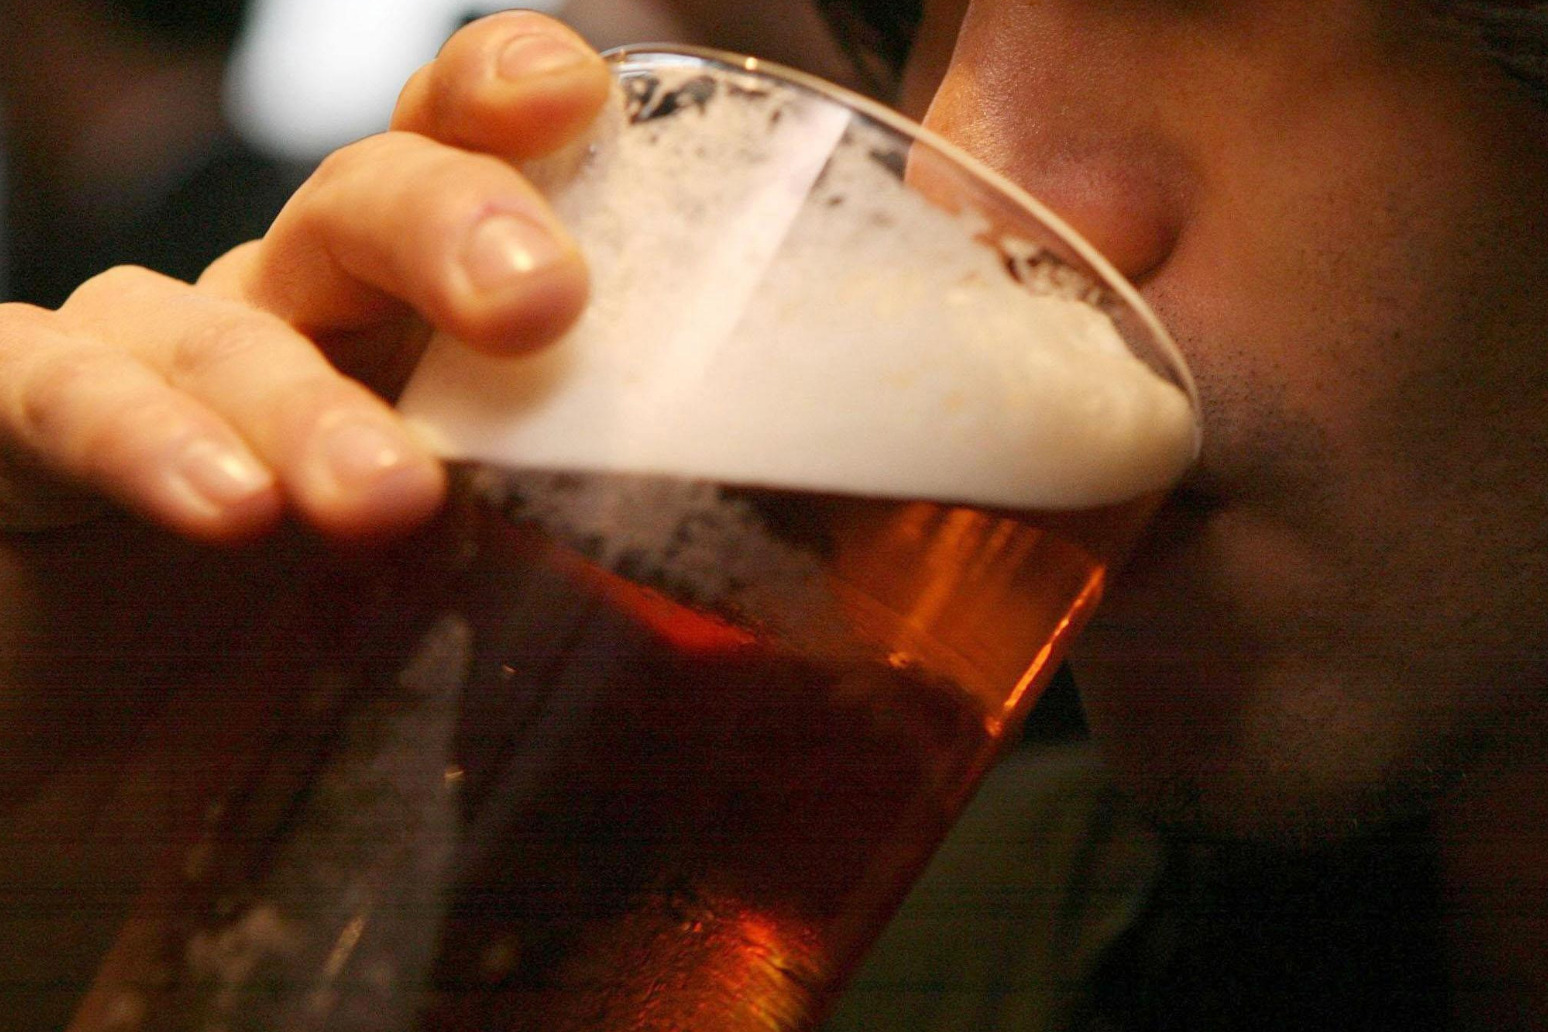 Beer prices set to jump by up to 30 pence per pint 